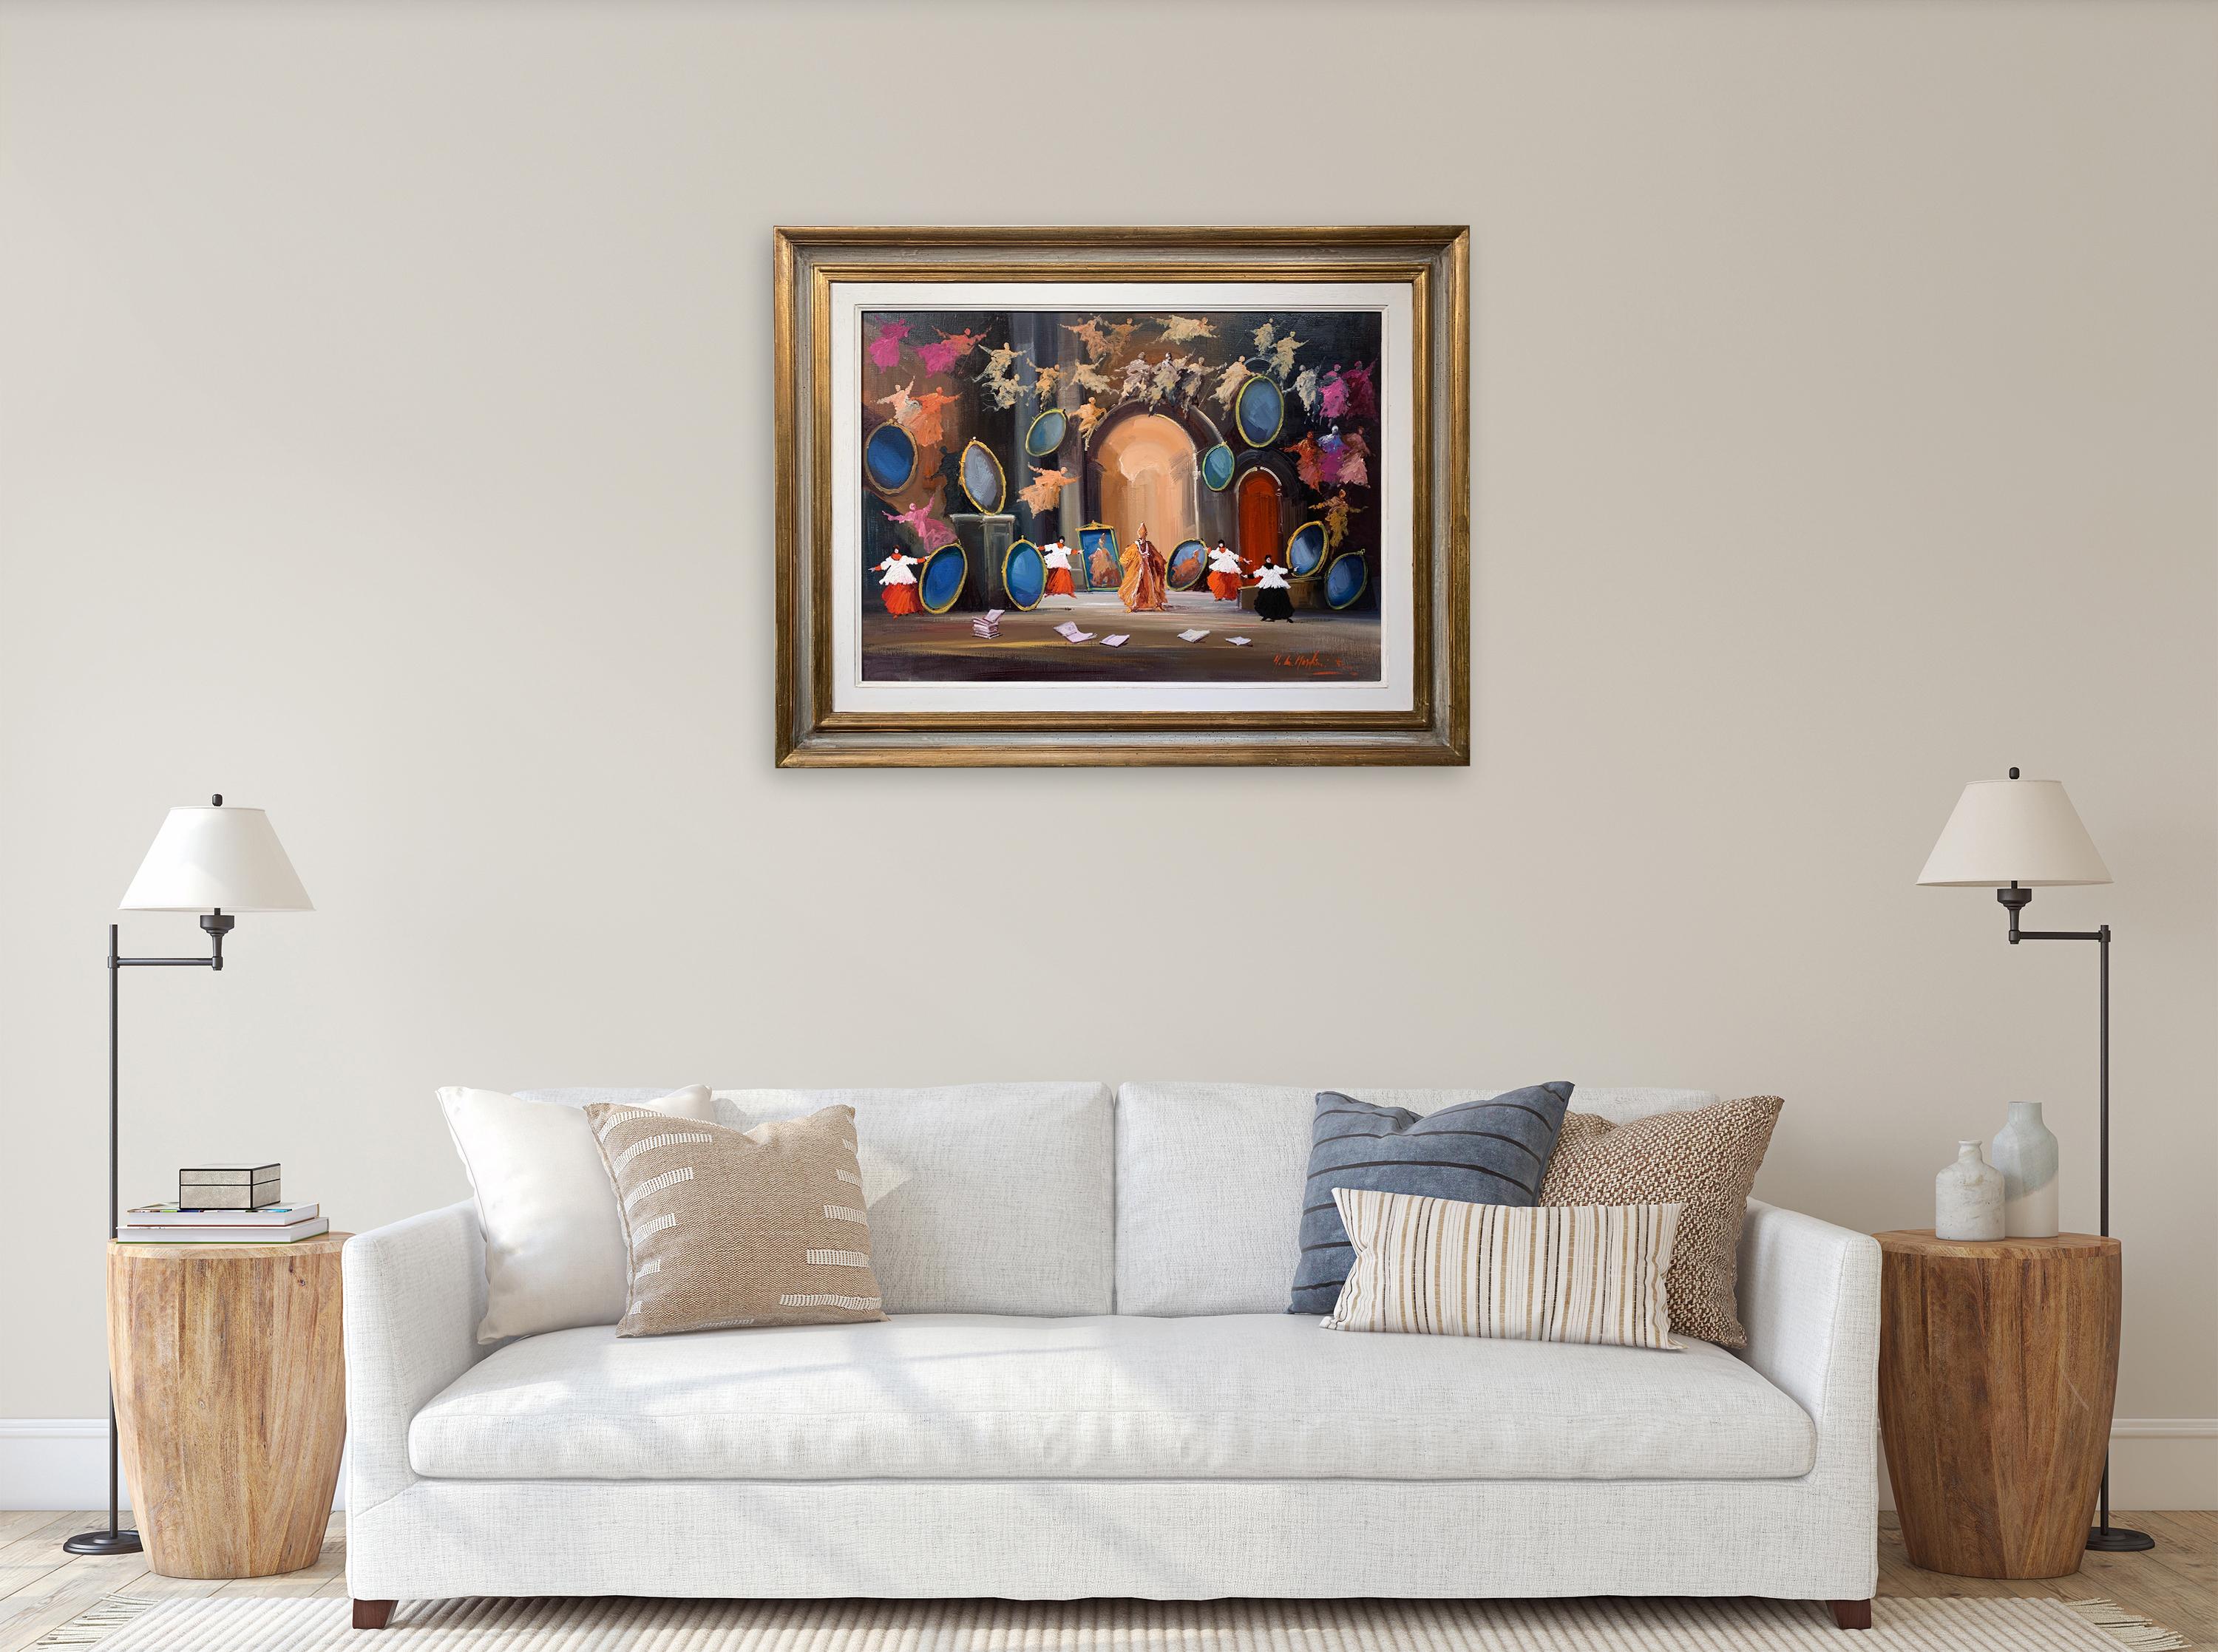 Room of Mirrors - Figurative Painting by Norberto Martini For Sale 1